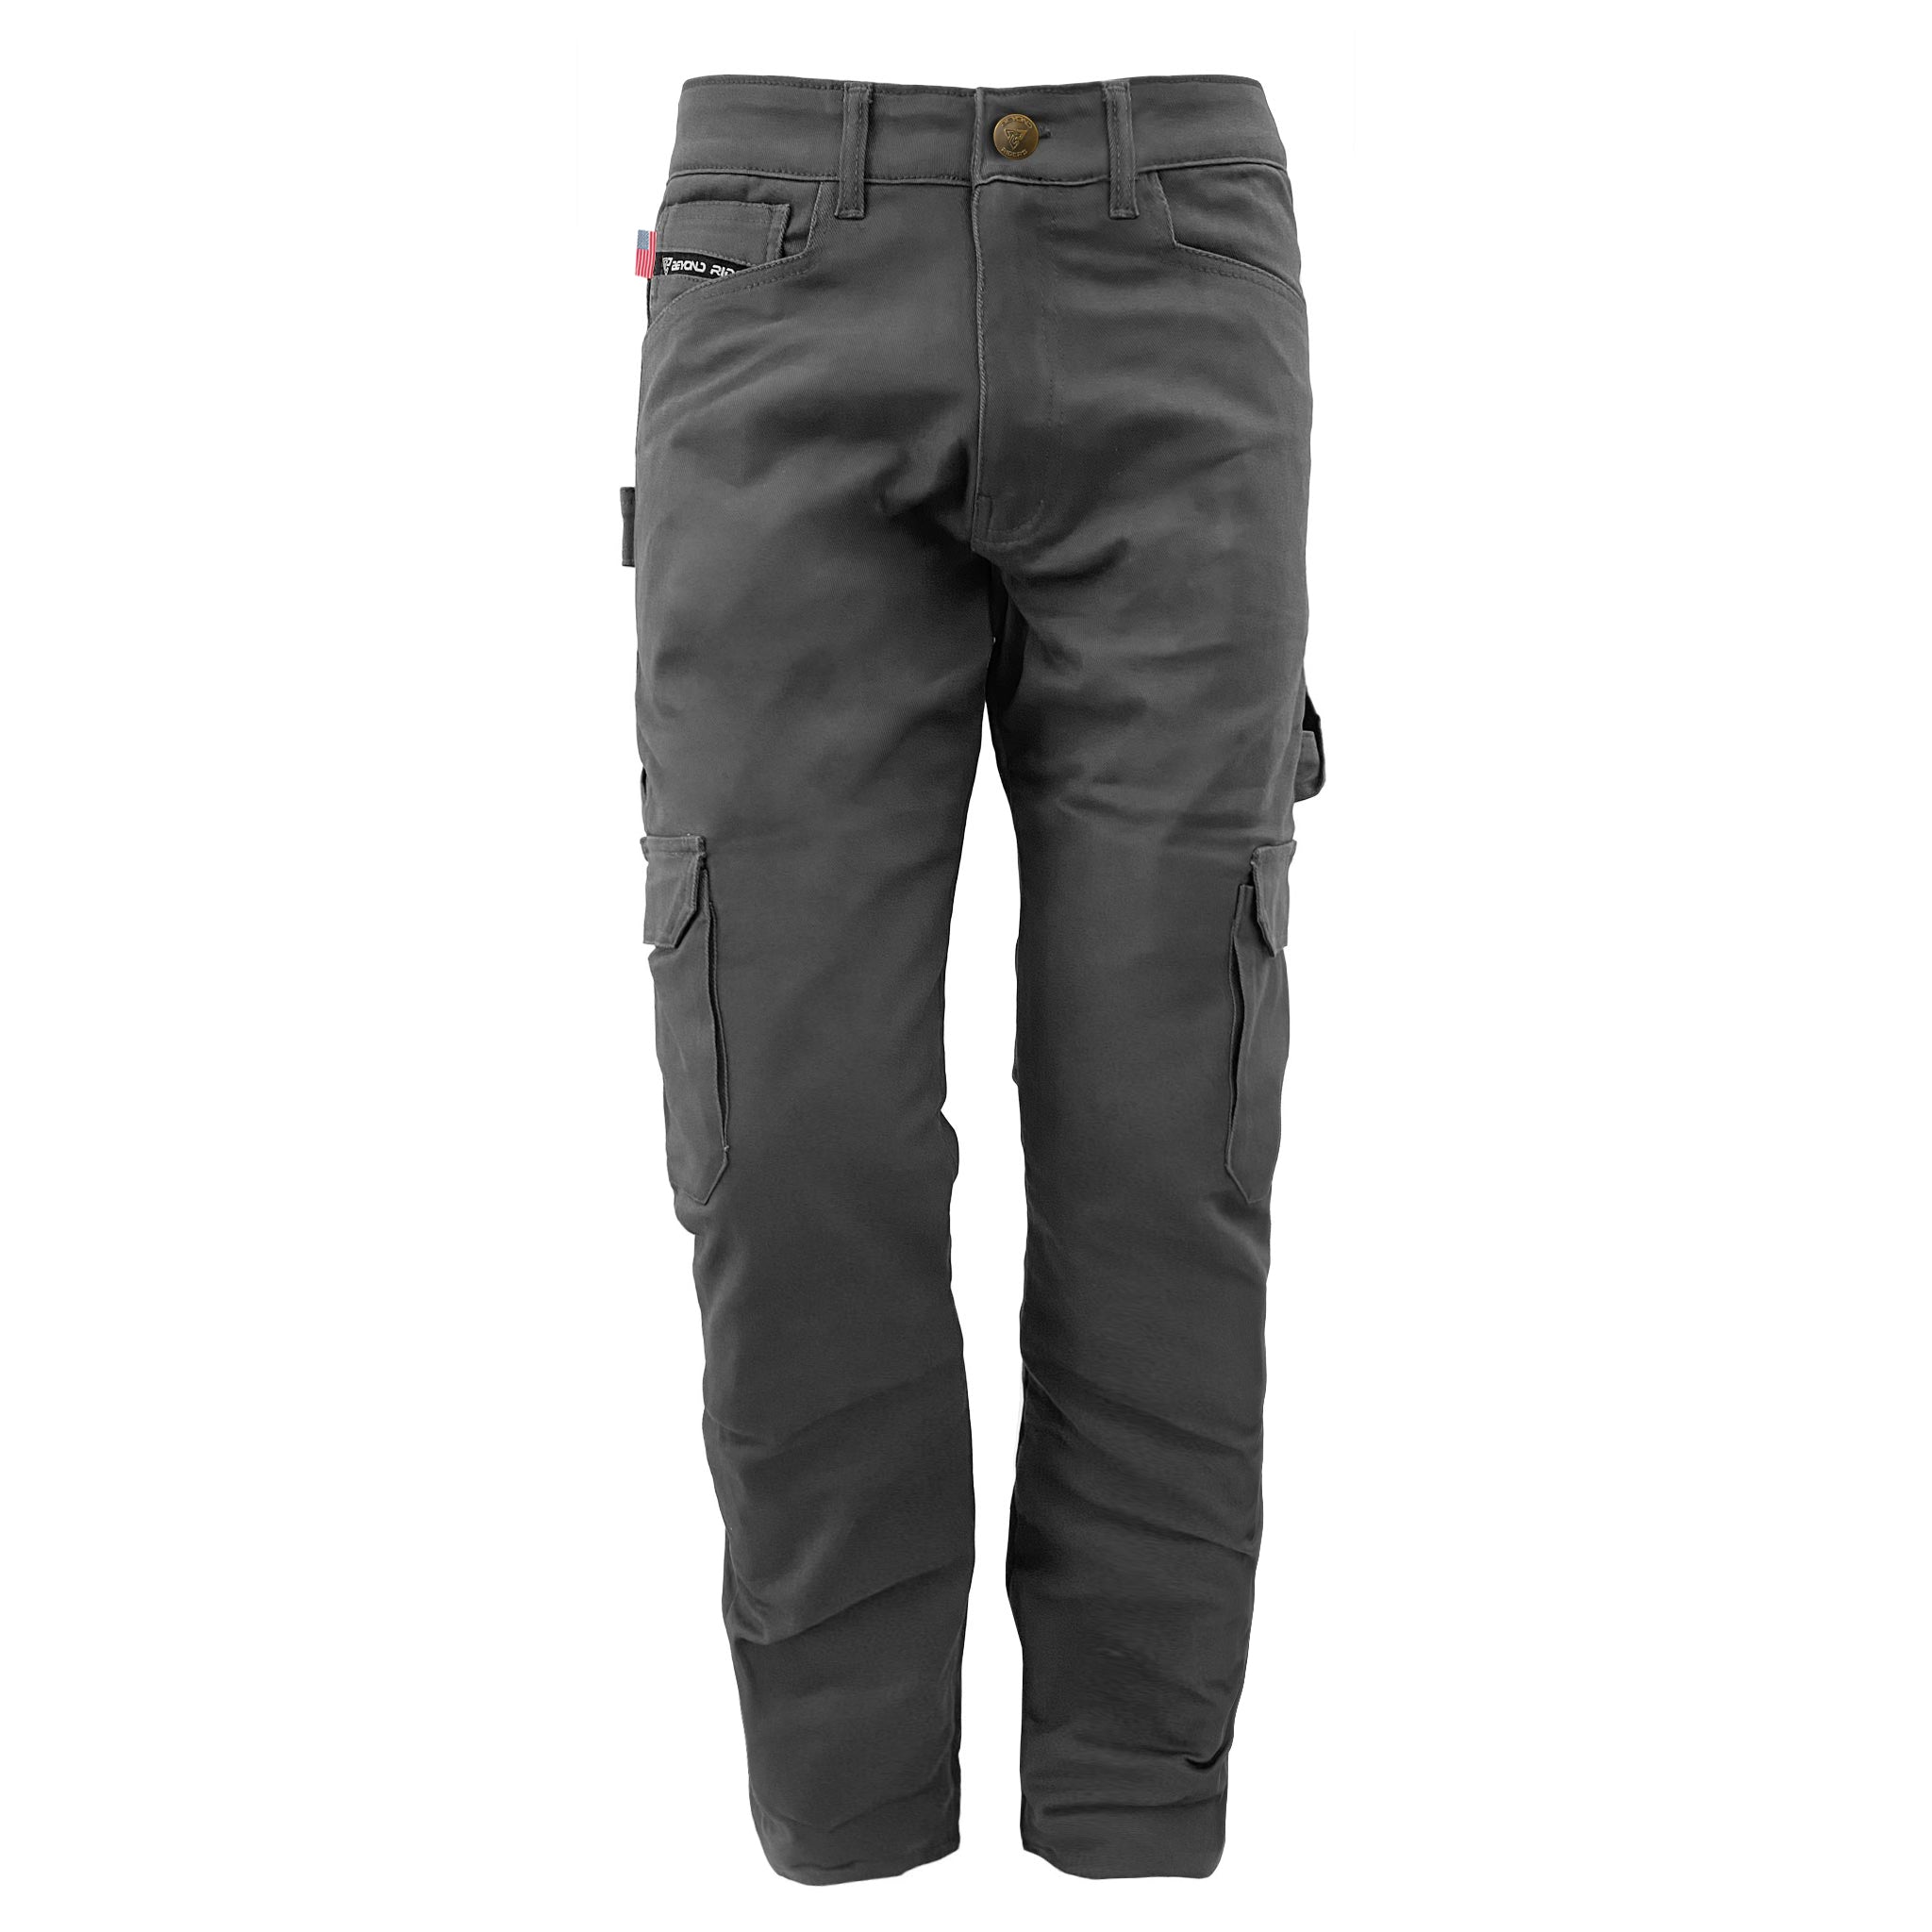 Cargo-Pants-Relaxed-Fit-For-Men-Solid-Grey-Front